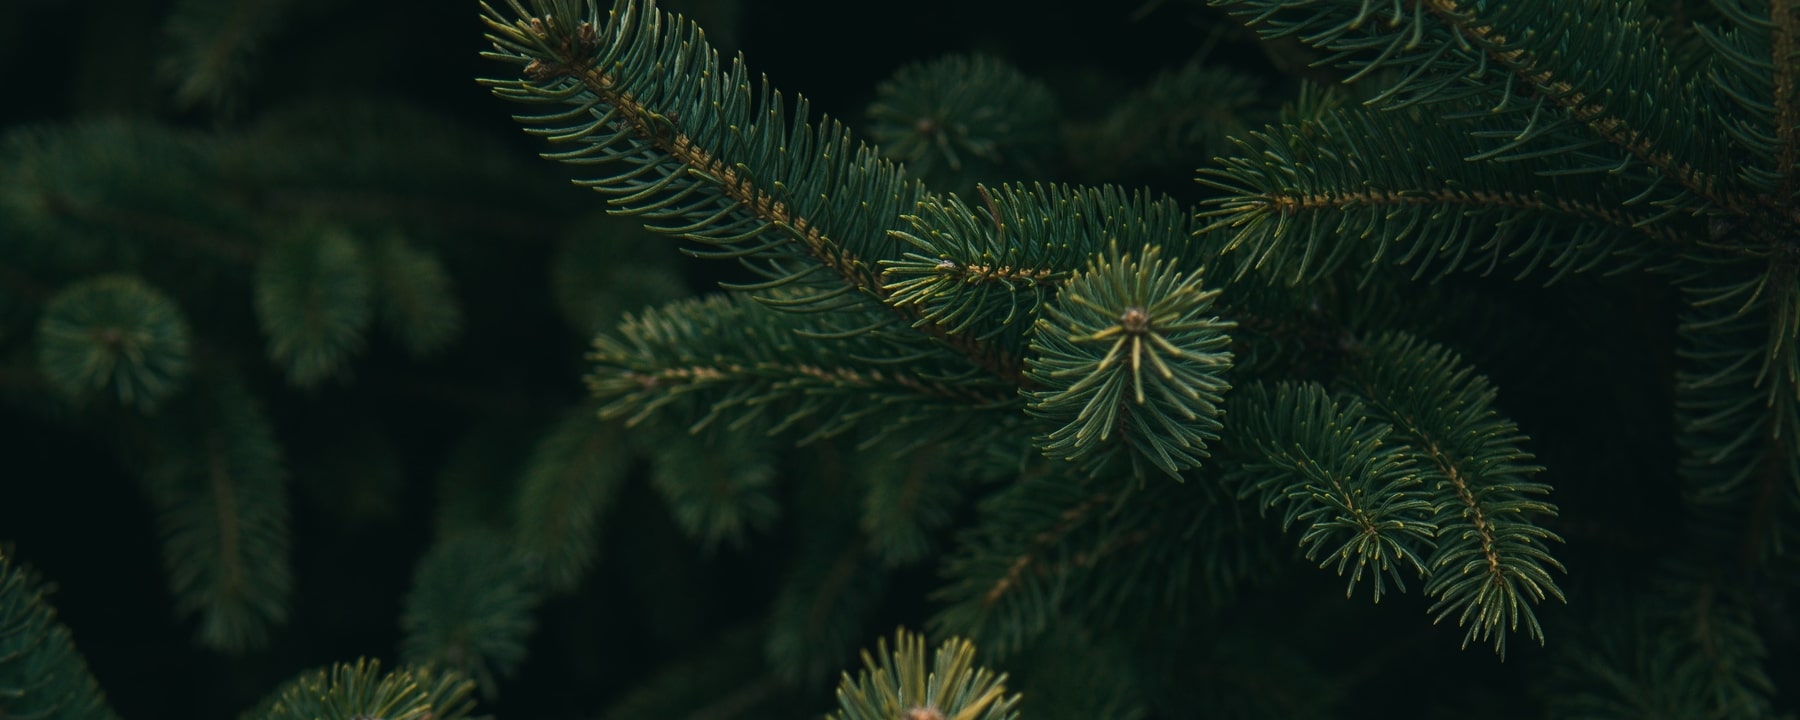 How to buy a sustainable Christmas tree this year